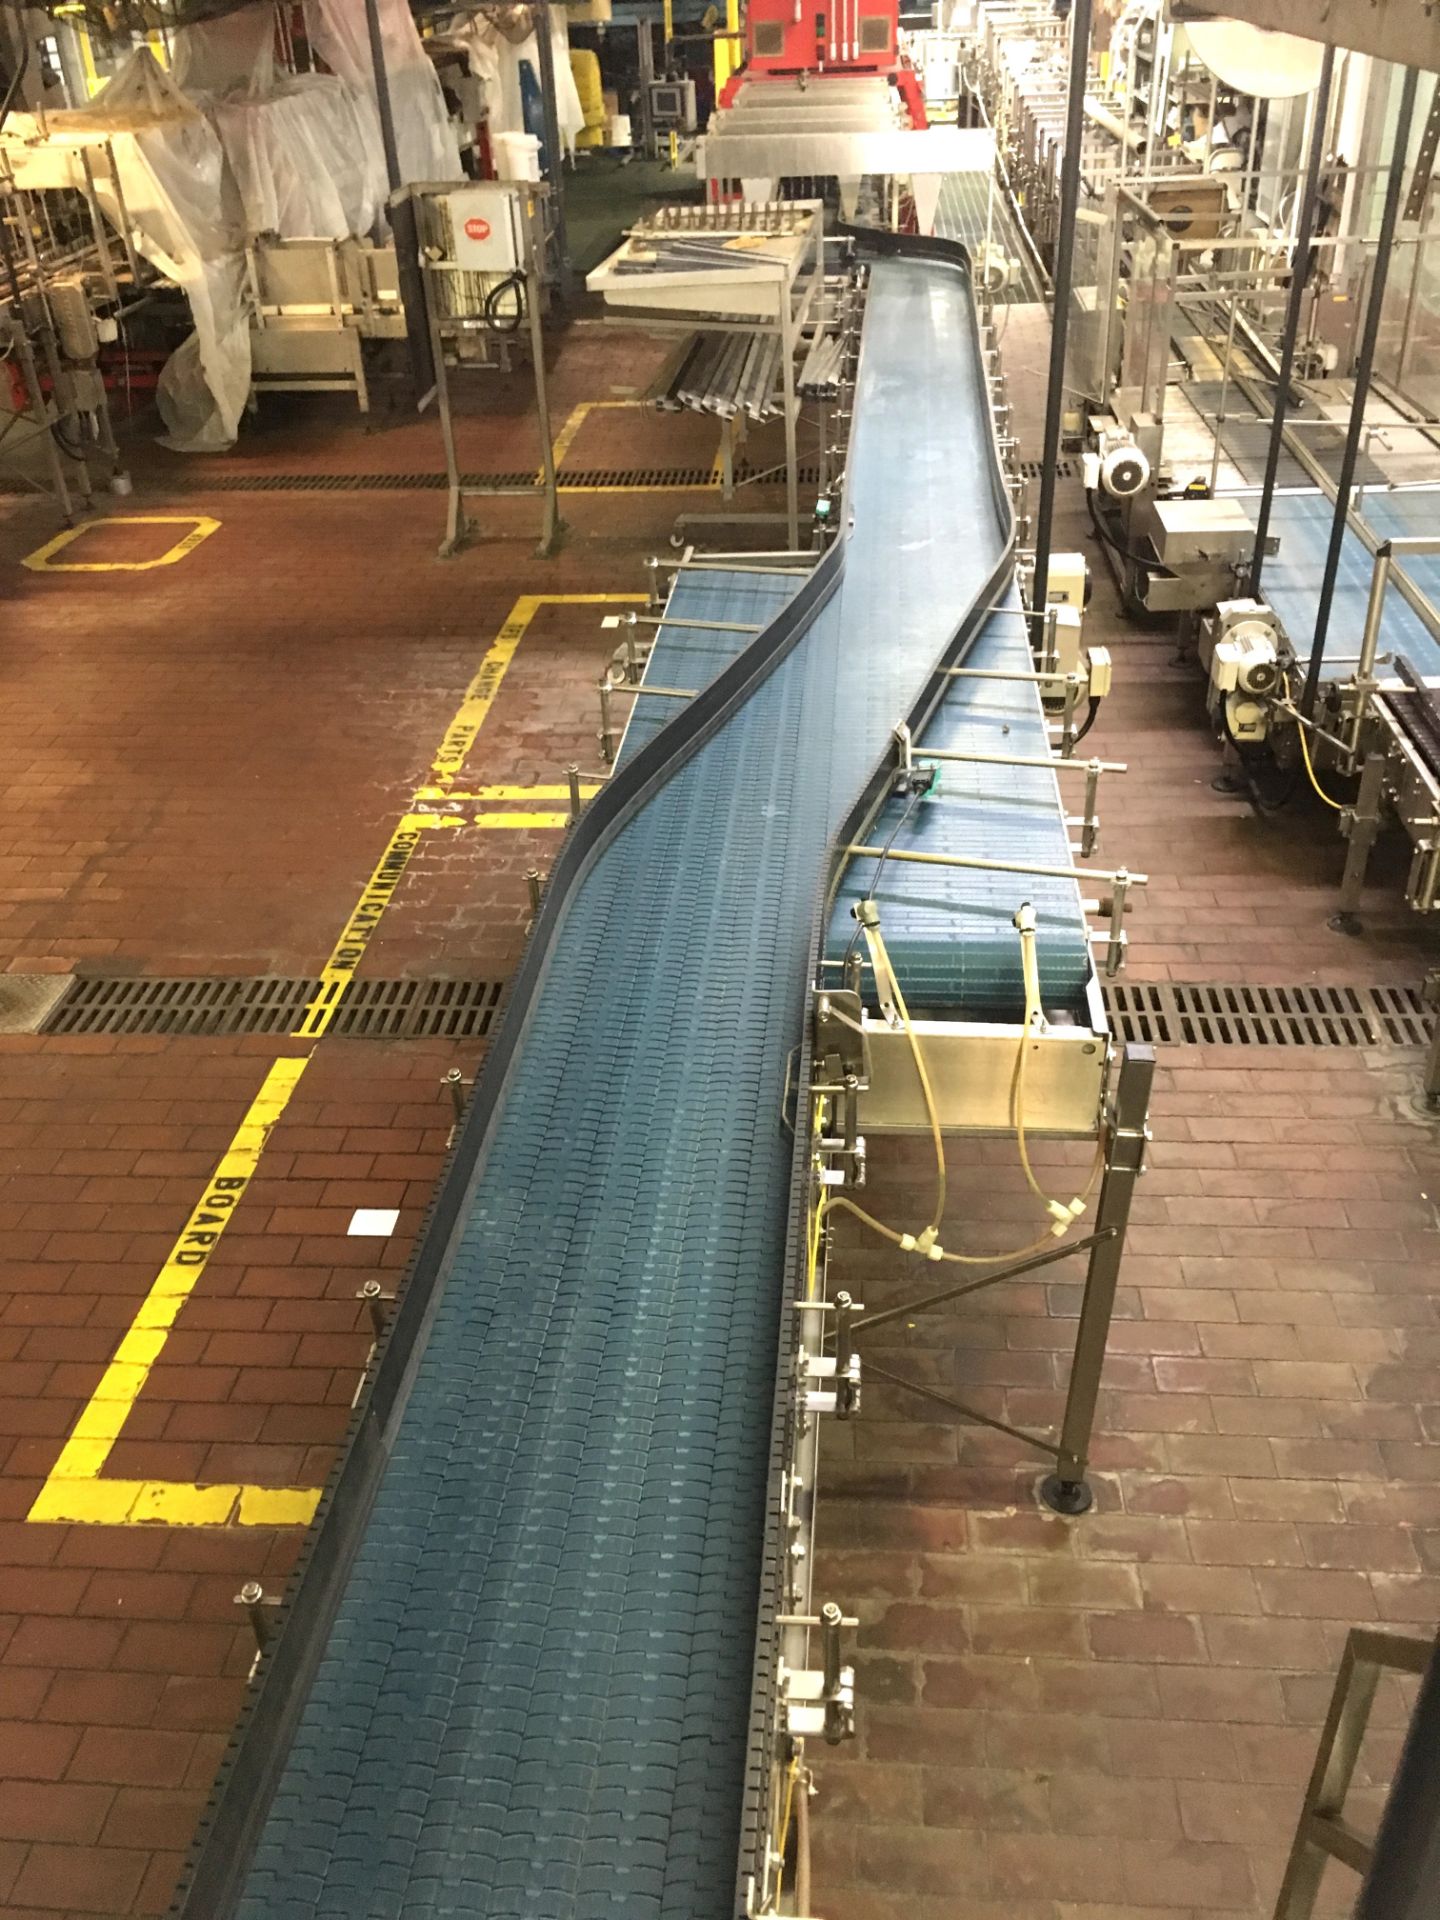 Lot of Bottle Conveyor from Accumulation Table to Packers, 8 foot long - 4.5" transition to 15" - Image 9 of 10